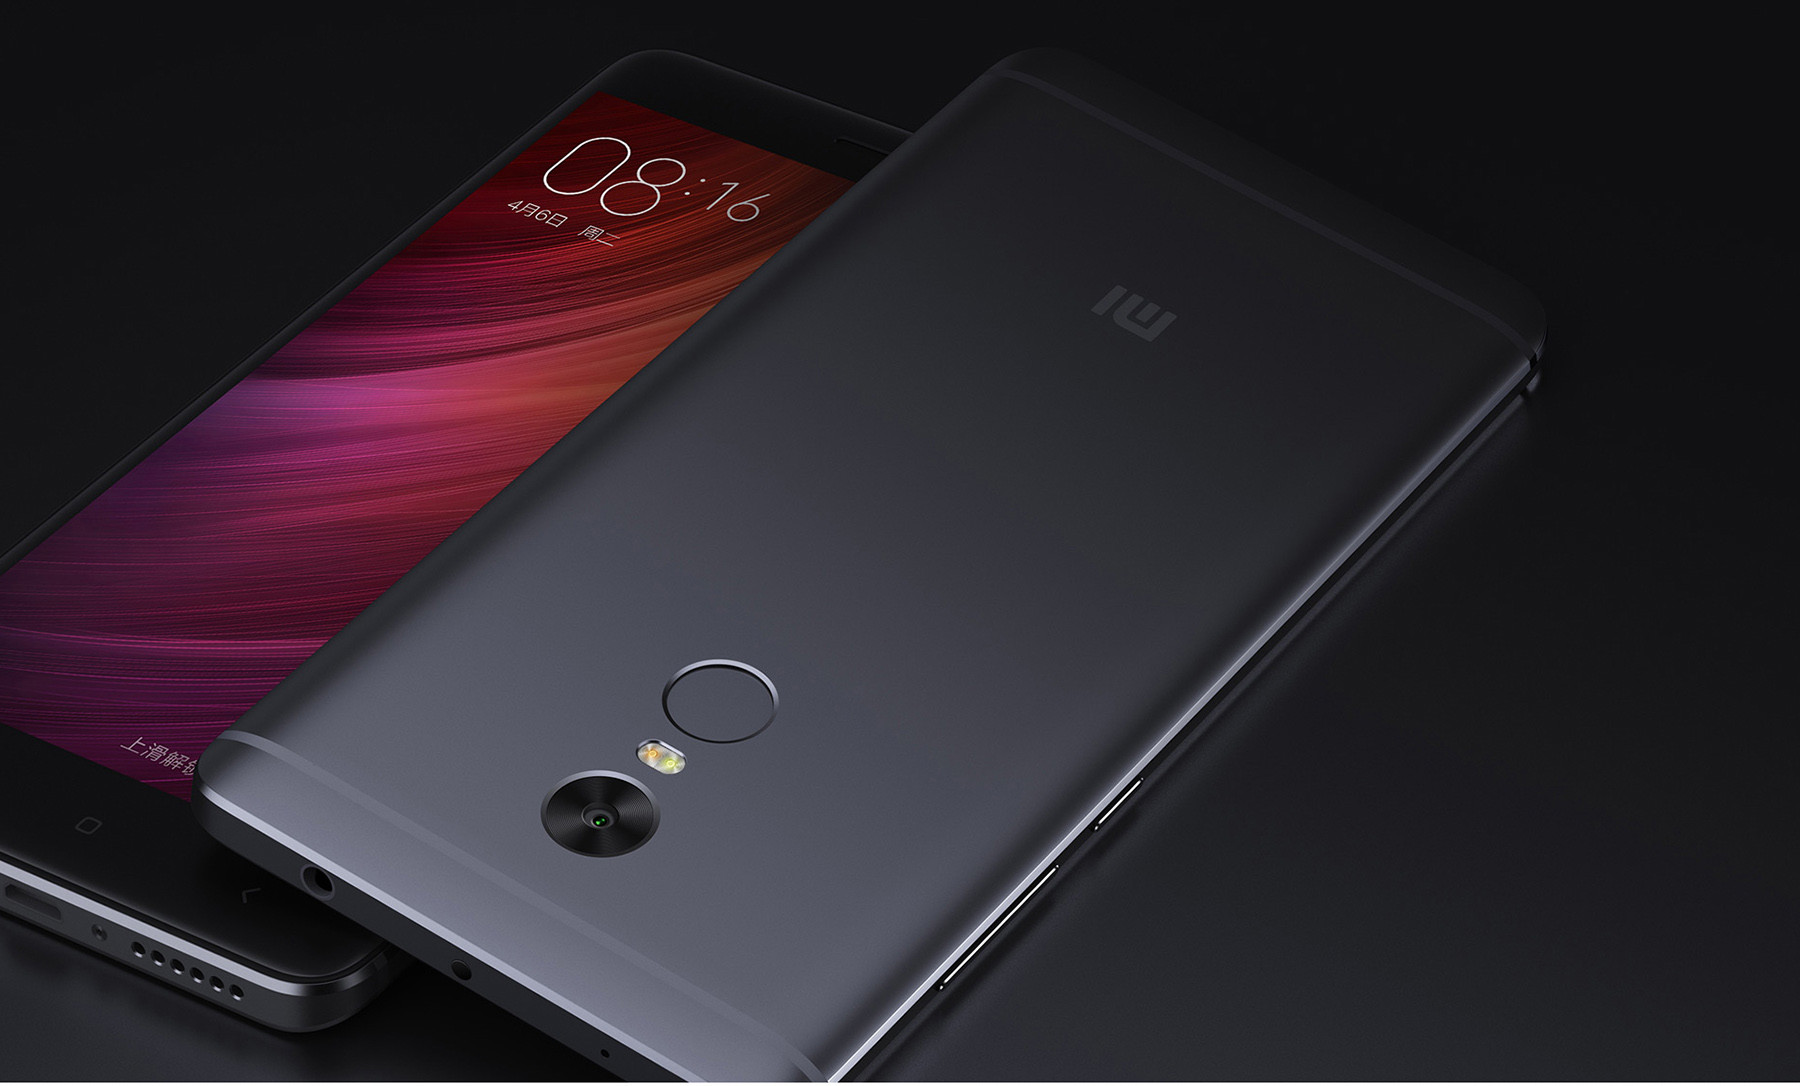 xiaomi redmi note 4 gets lineage os 15.0 with unofficial version of android 8.0 oreo